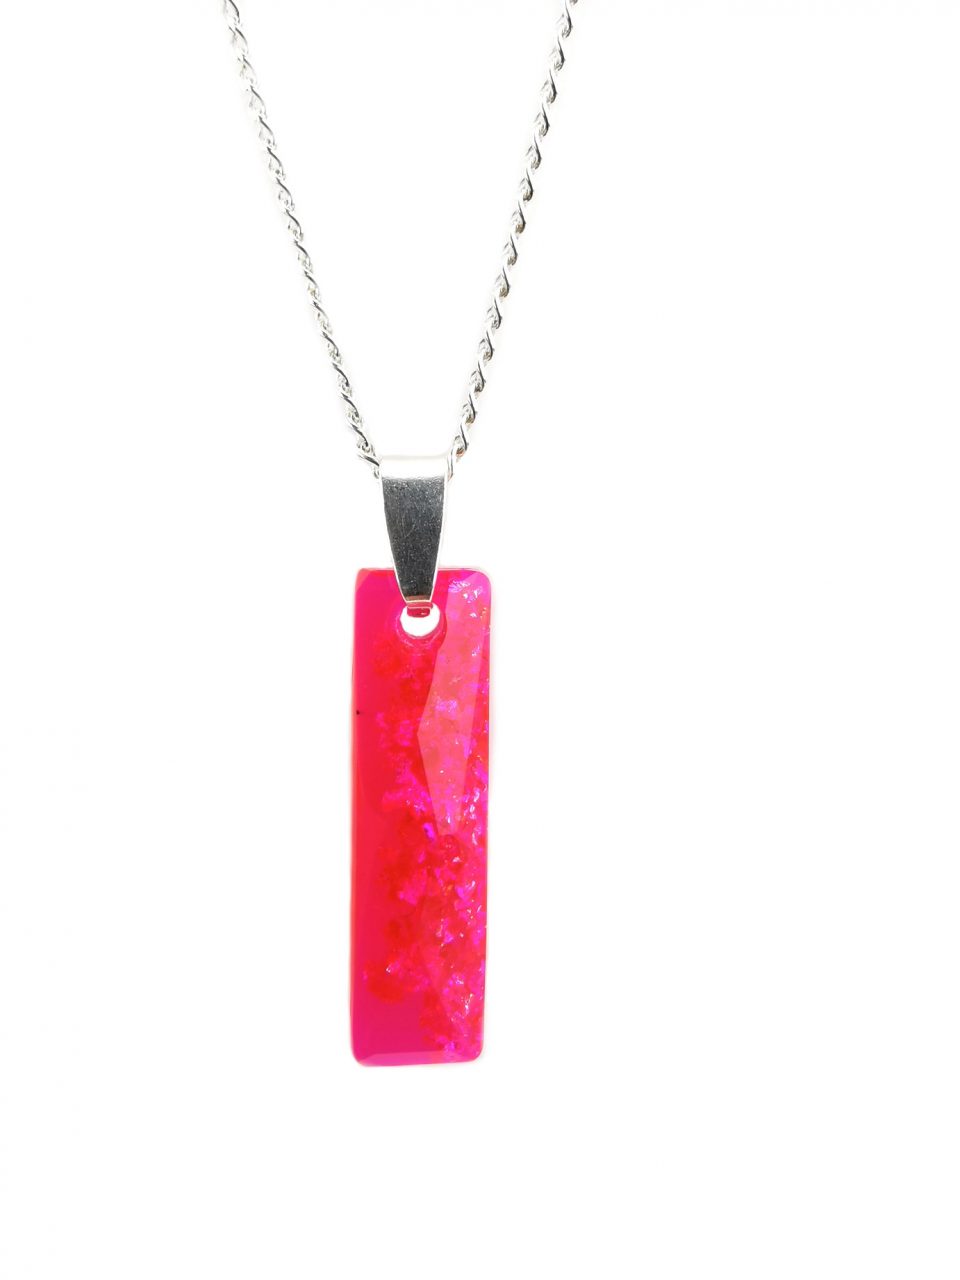 Pink Queen Baguette Orgone Pendant by OrgoneVibes